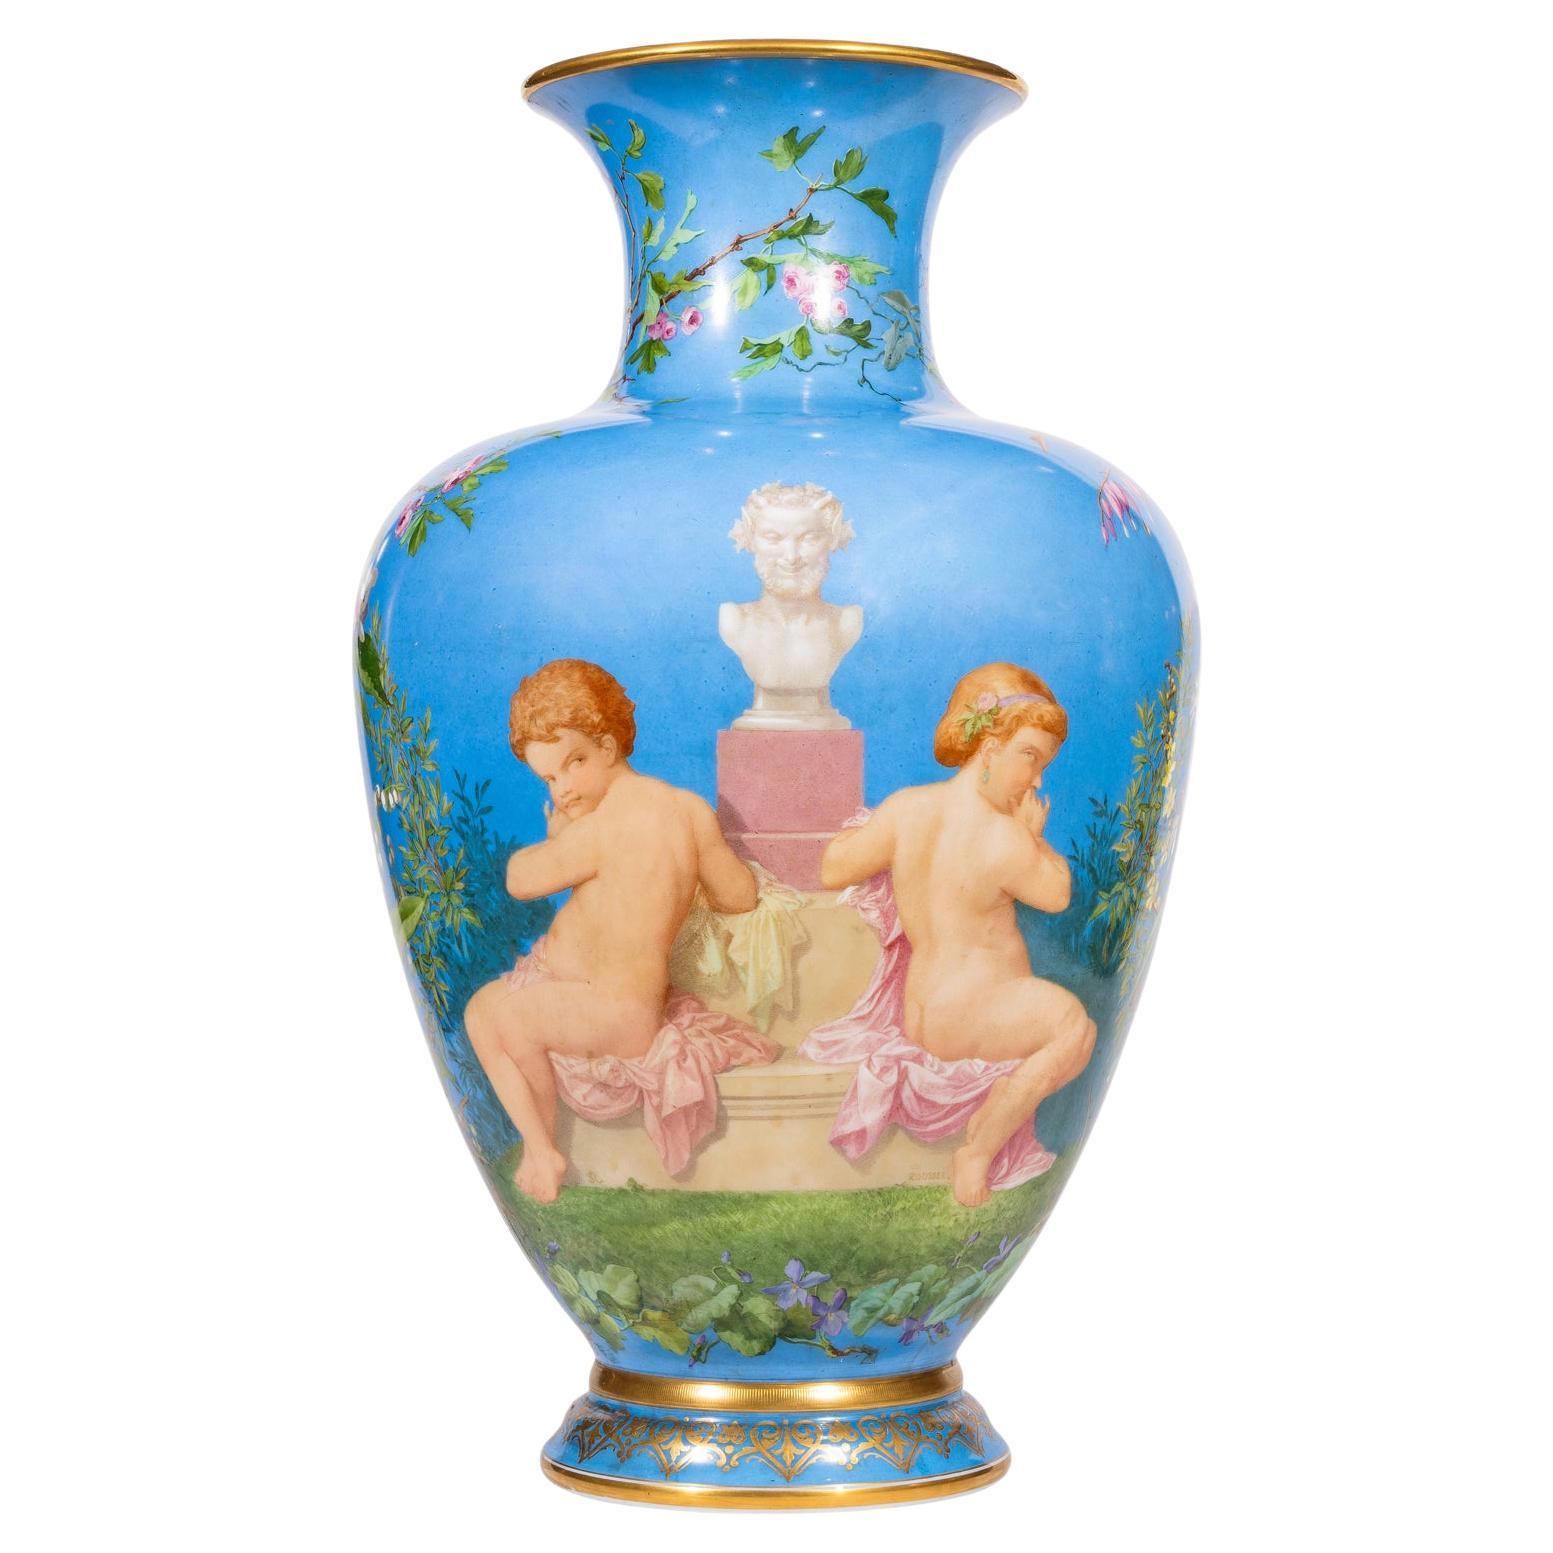 A Large French Baccarat Opaline Glass Hand-Painted "Bacchanale" Vase, by Roussel